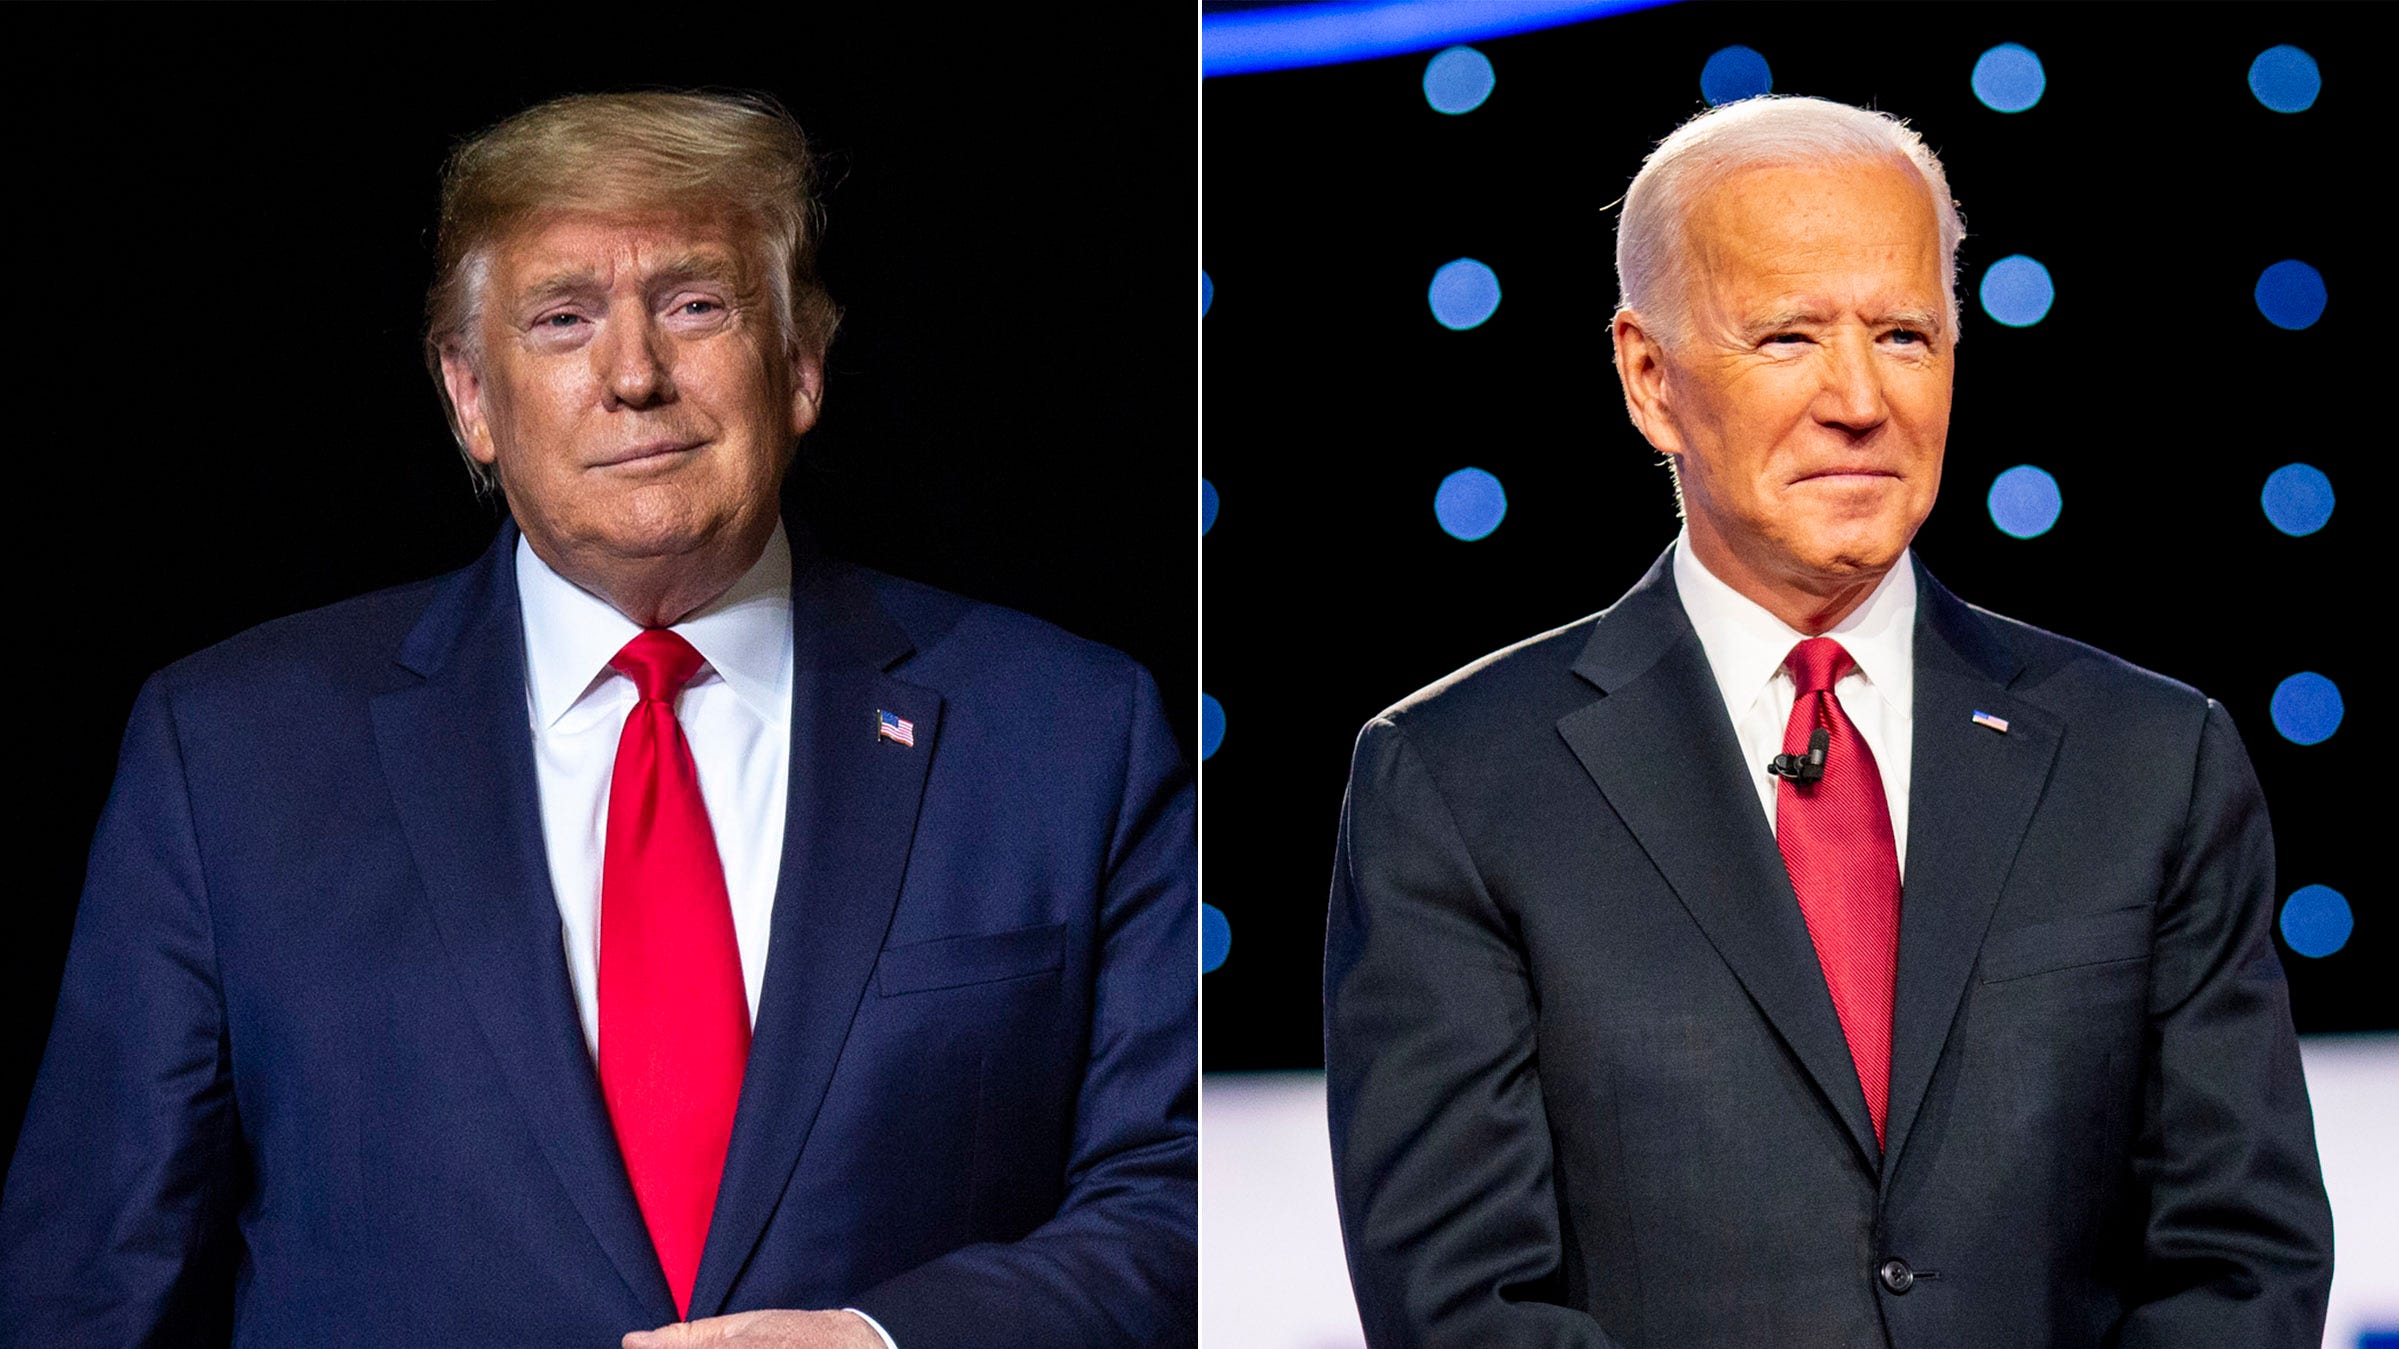 More Michiganders view Biden favorably than Trump, new survey shows